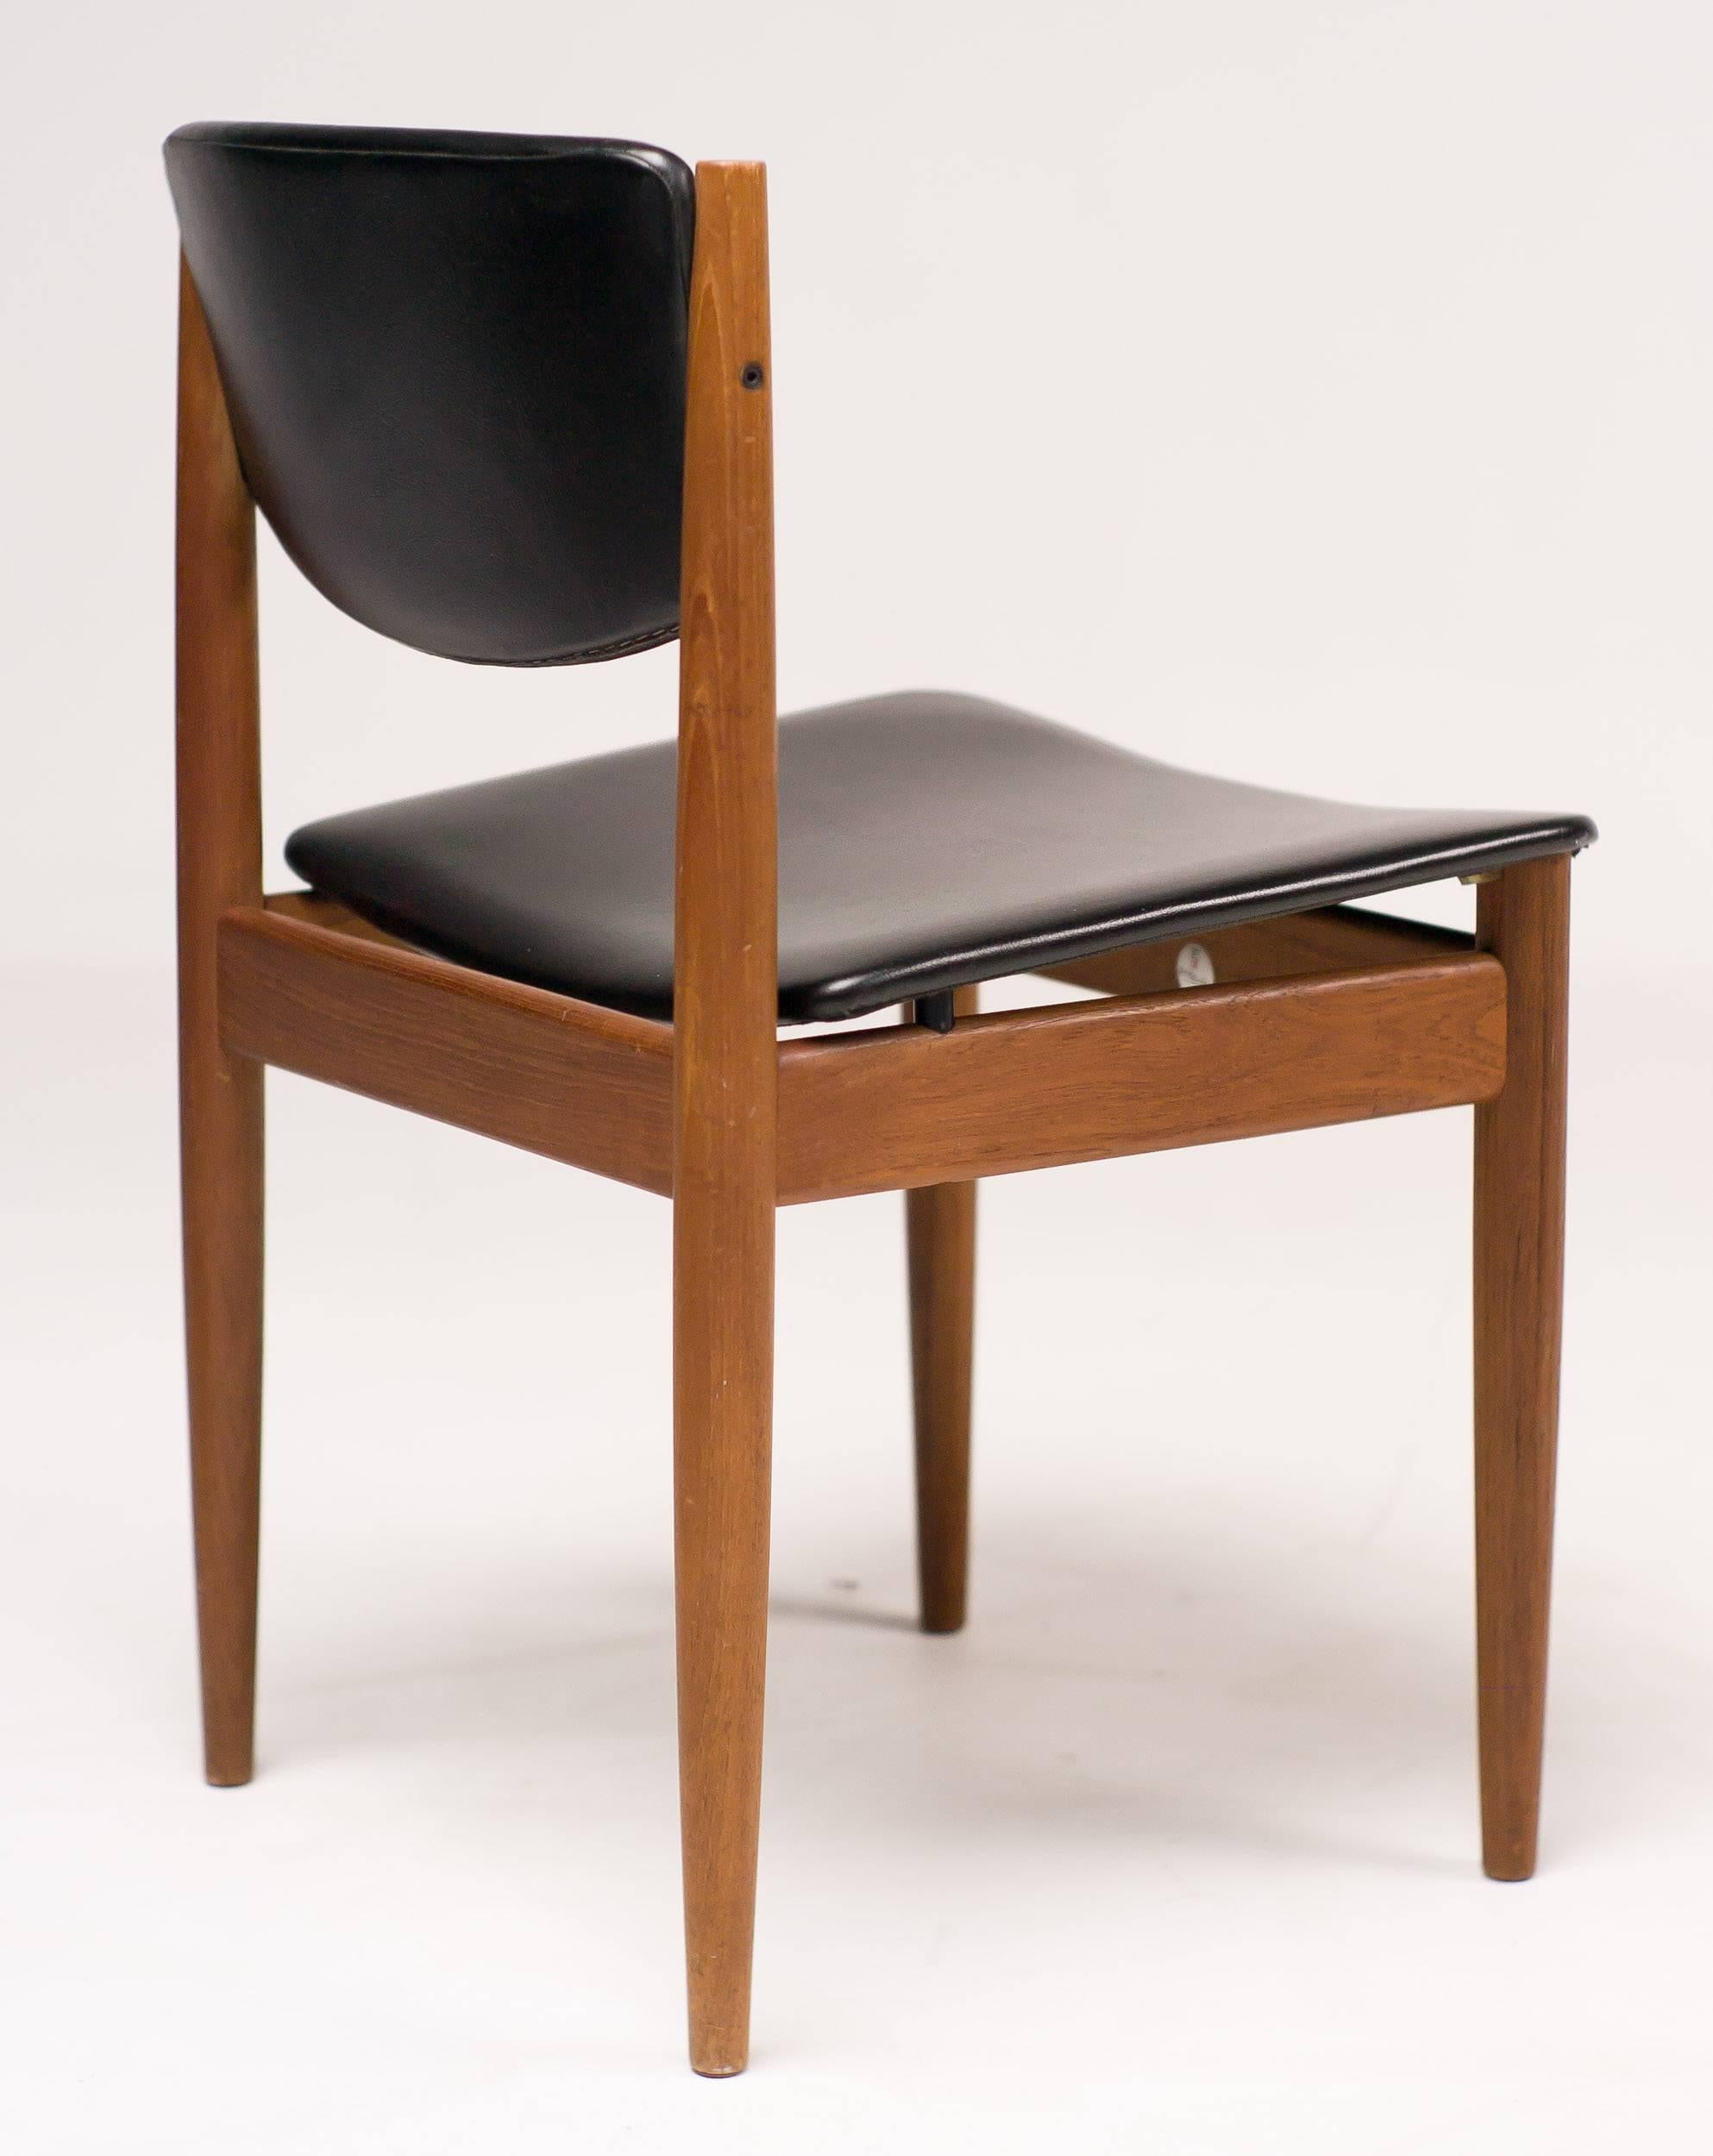 These elegant chairs are made in Denmark and bare the original manufacture silver label underneath. They maintain their original black vinyl upholstery that is in excellent shape, except for two very small splits in the vinyl on the back of one